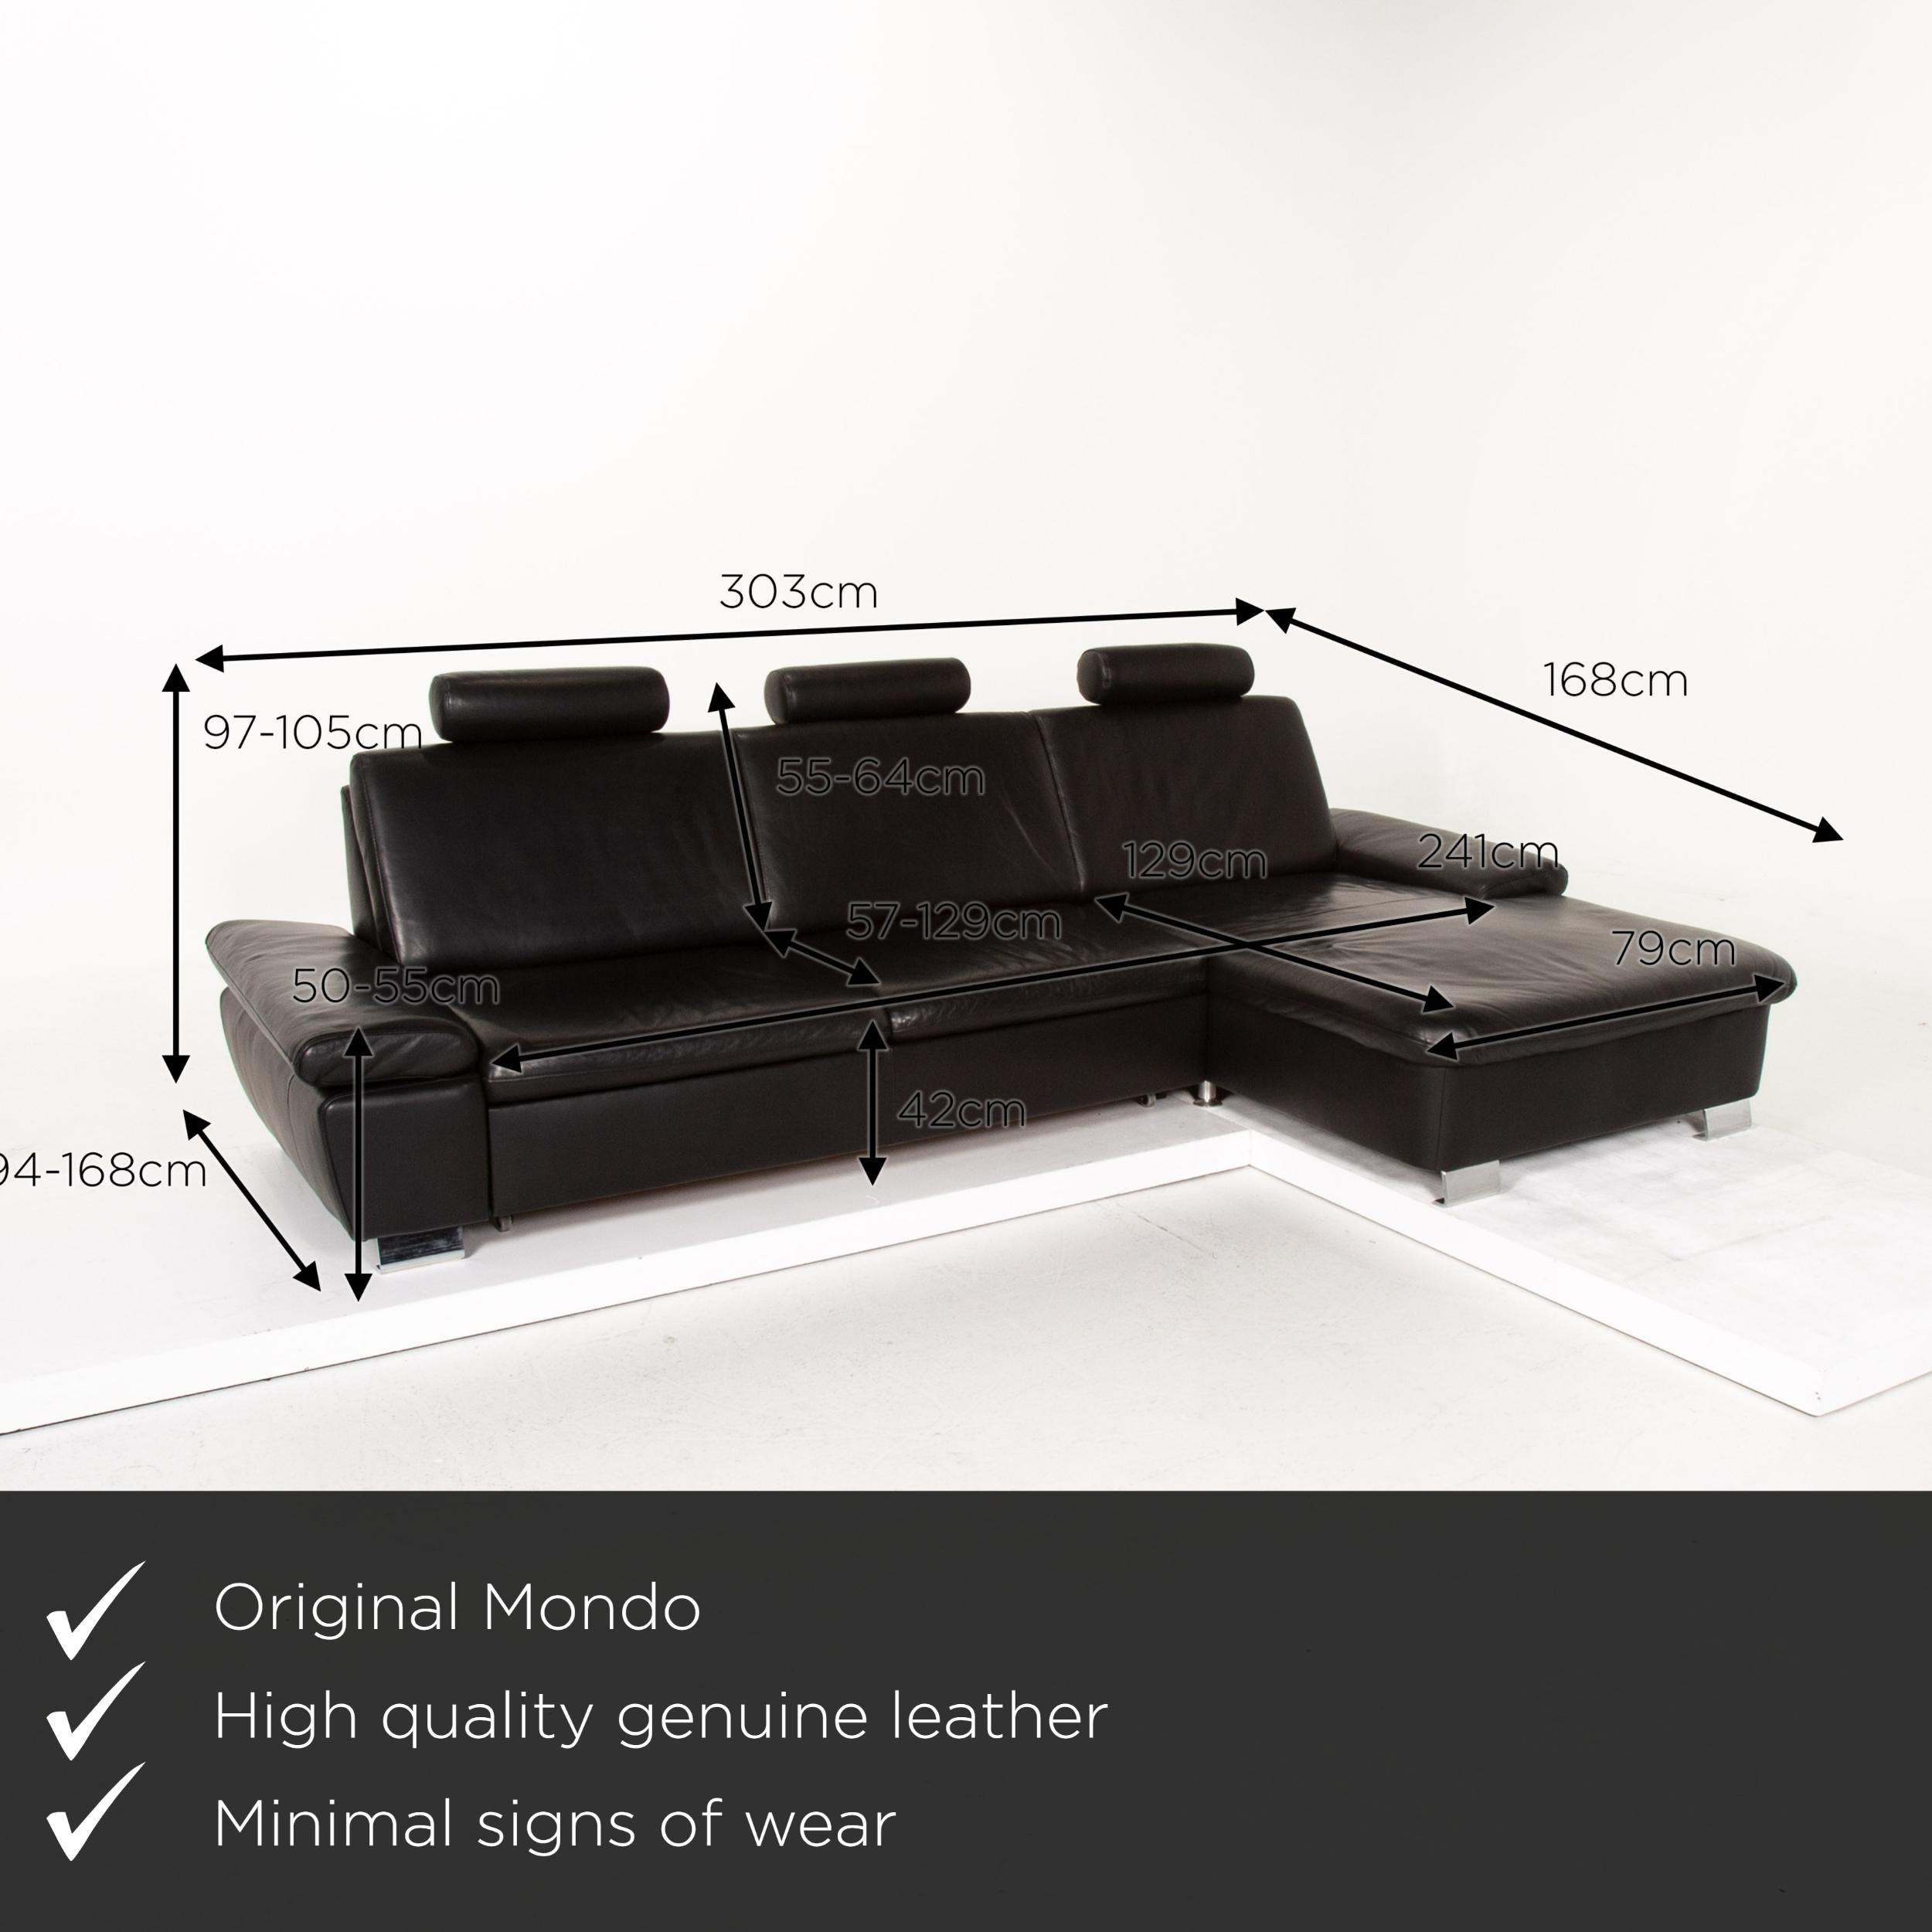 We present to you a Mondo leather sofa set black 1x corner sofa 1x stool sleep function.

Product measurements in centimeters:

Depth 94
Width 303
Height 97
Seat height 42
Rest height 50
Seat depth 57
Seat width 241
Back height